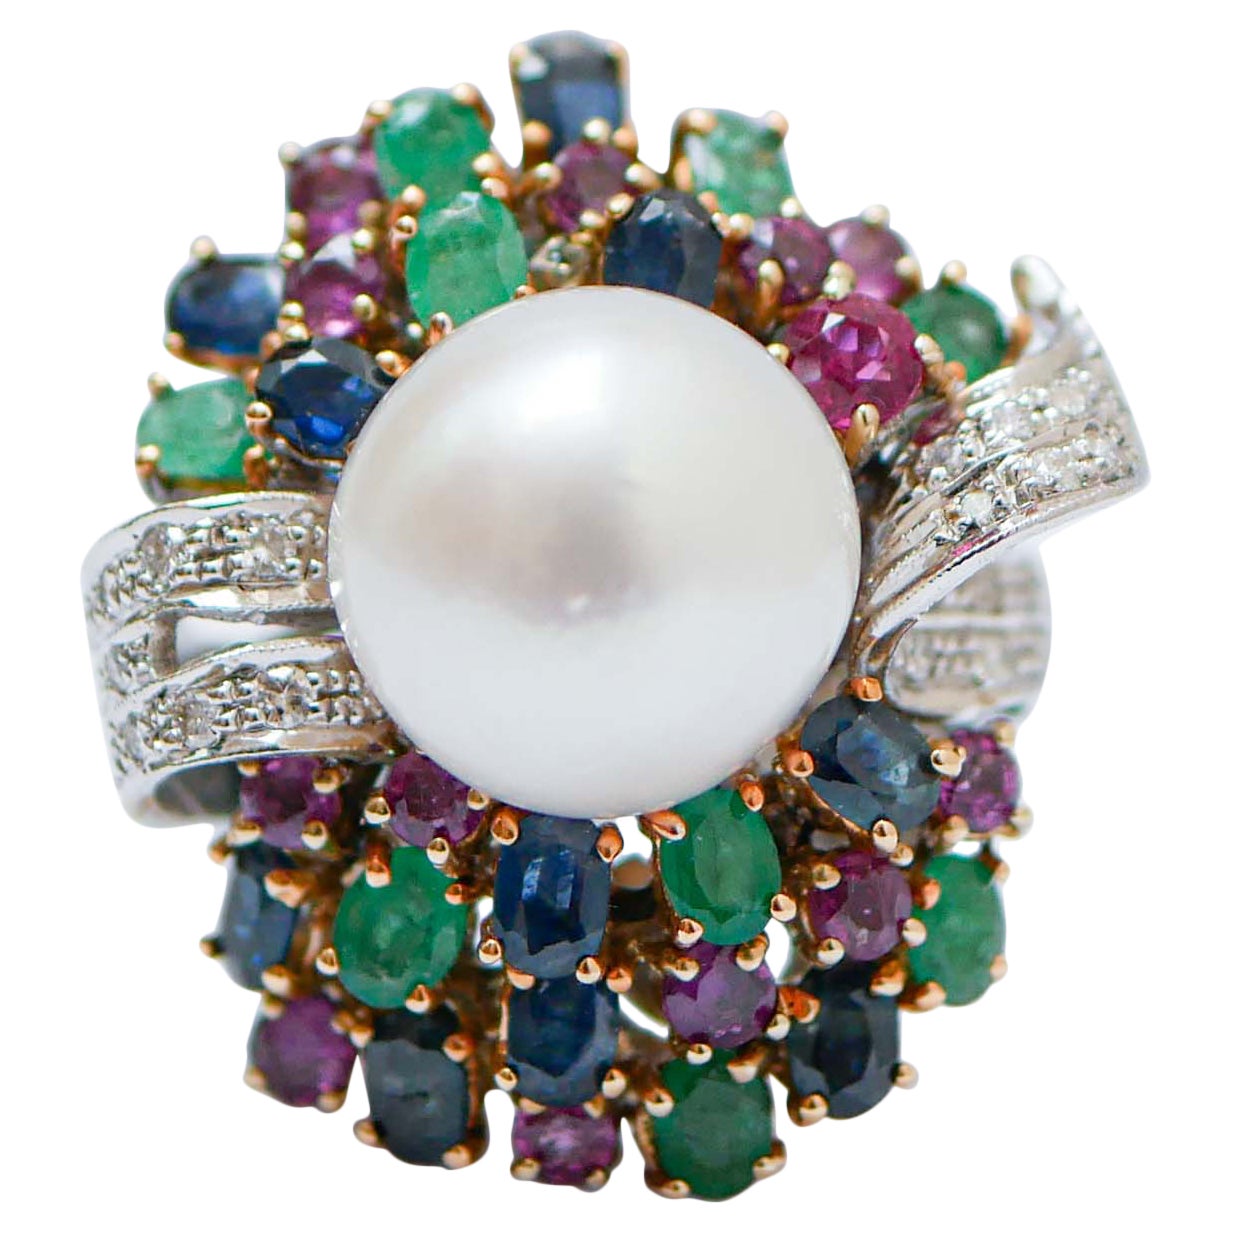 South-Sea Pearls, Emeralds, Rubies, Sapphires, Diamonds, 14 Kt White Gold Ring.